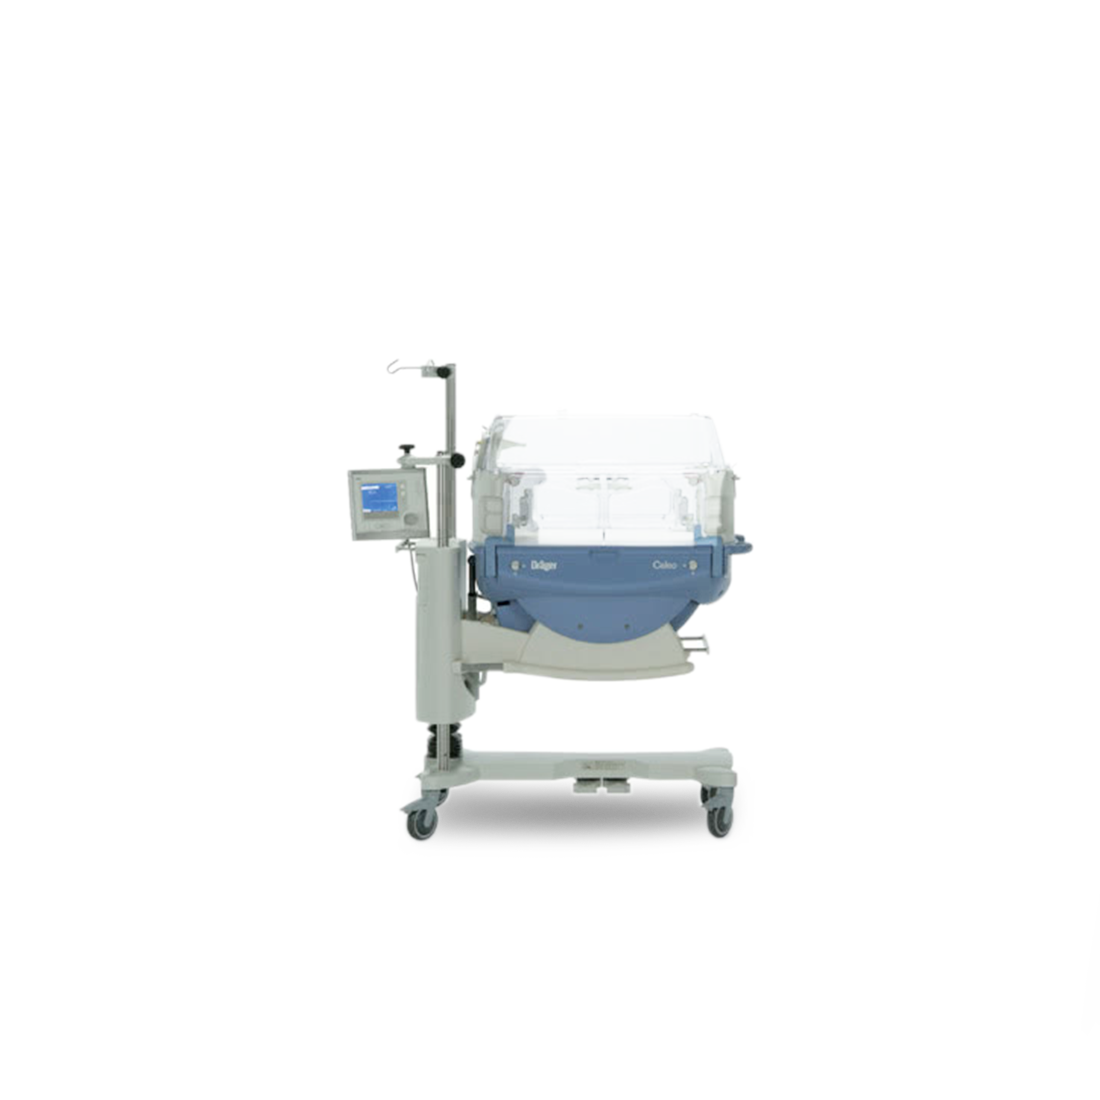 Drager Air Shields Caleo Infant Incubator